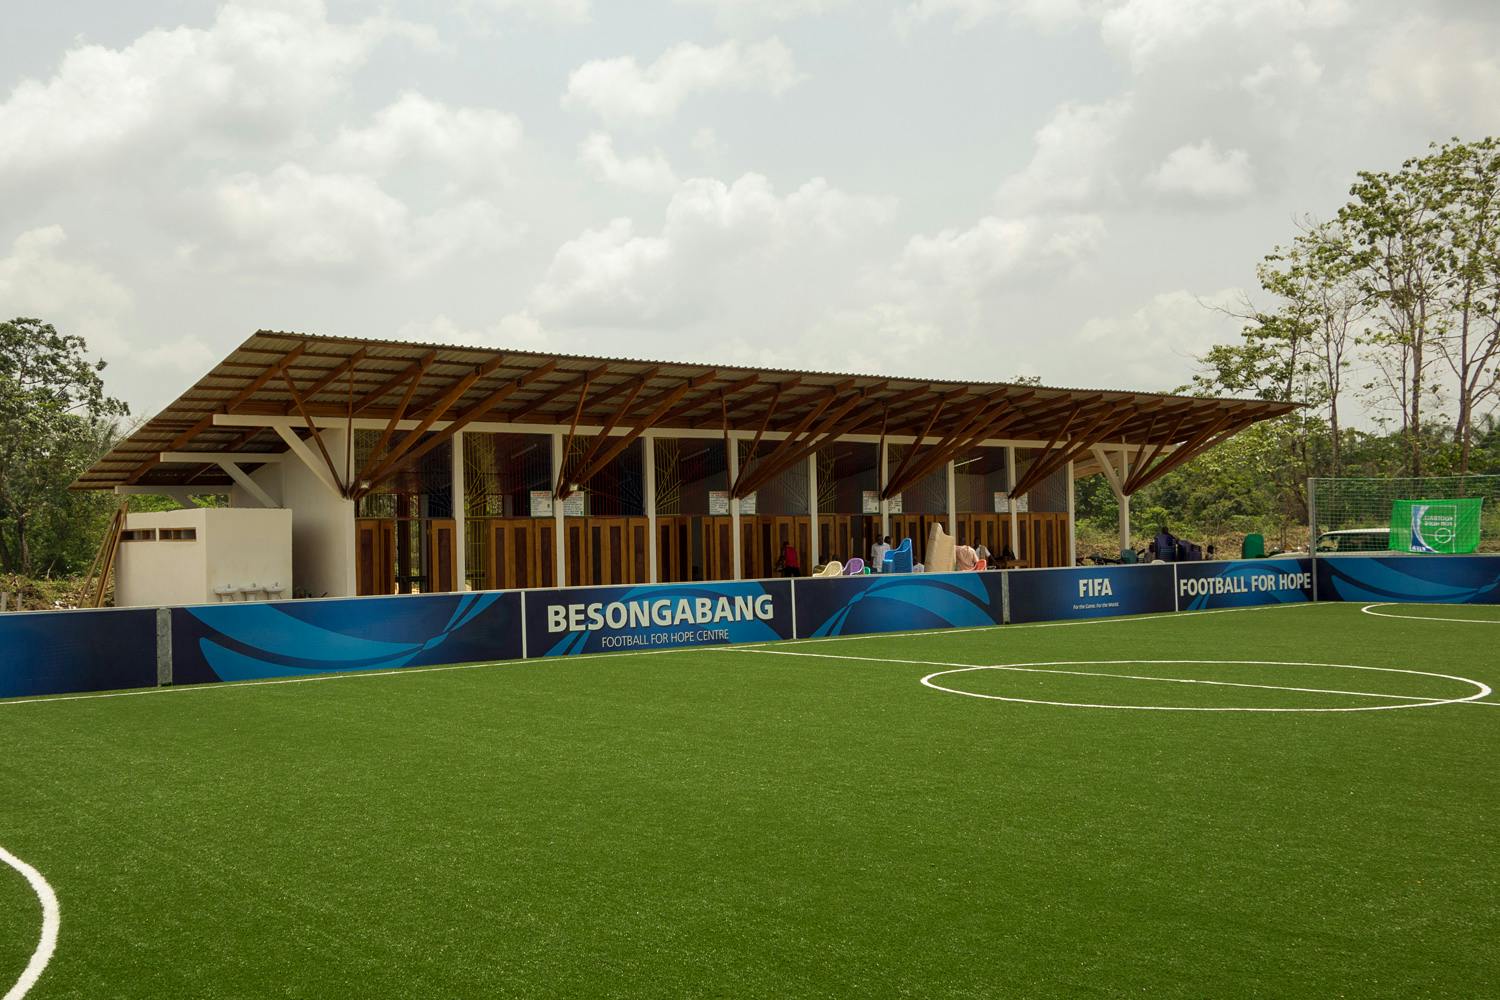 Architecture for Humanity completes 20 Football for Hope Centers across  Africa